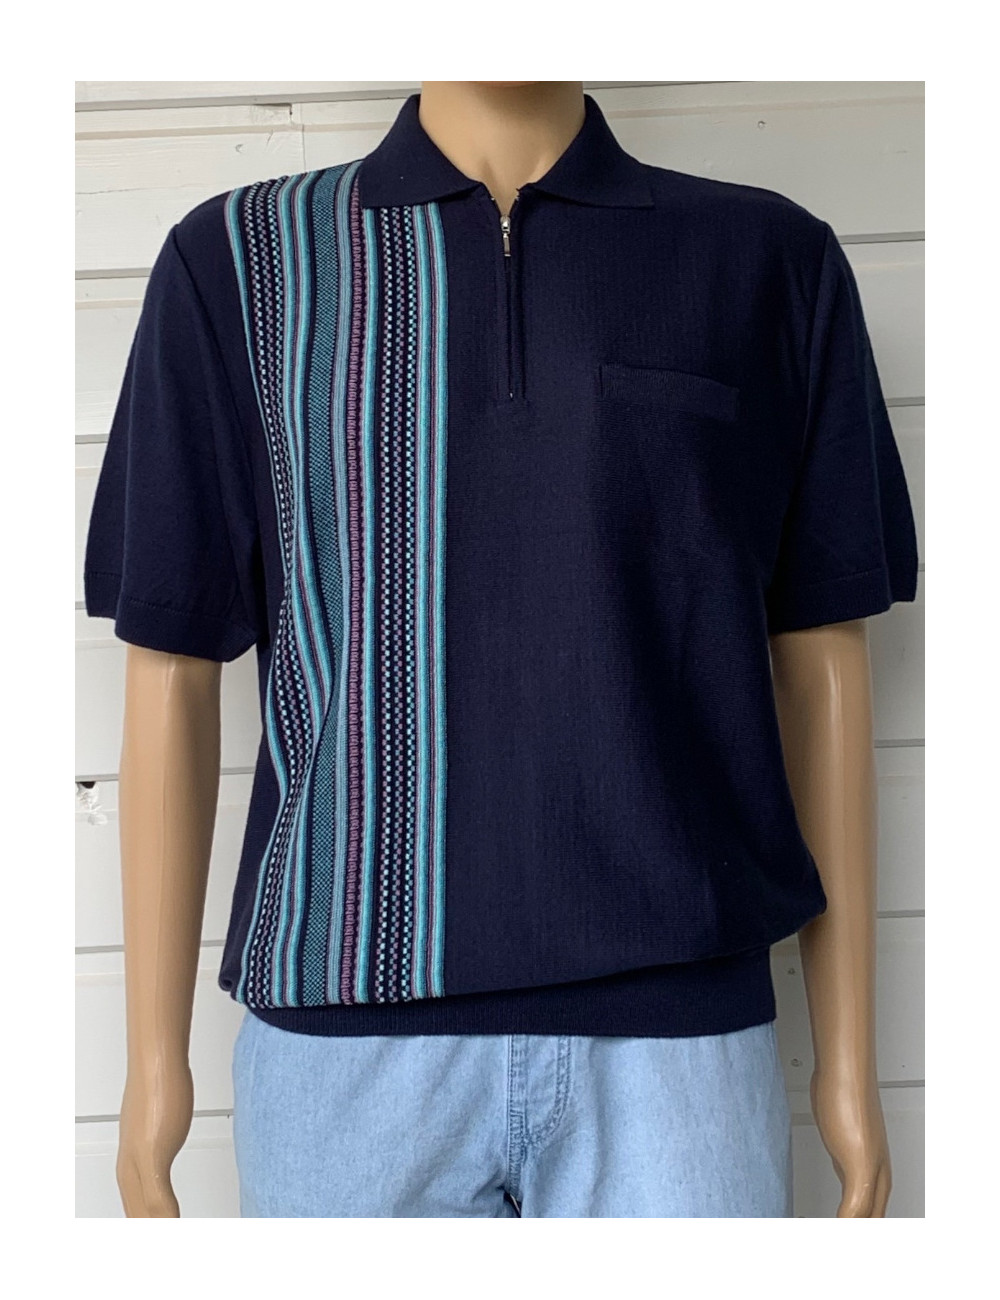 polo homme grande taille en maille